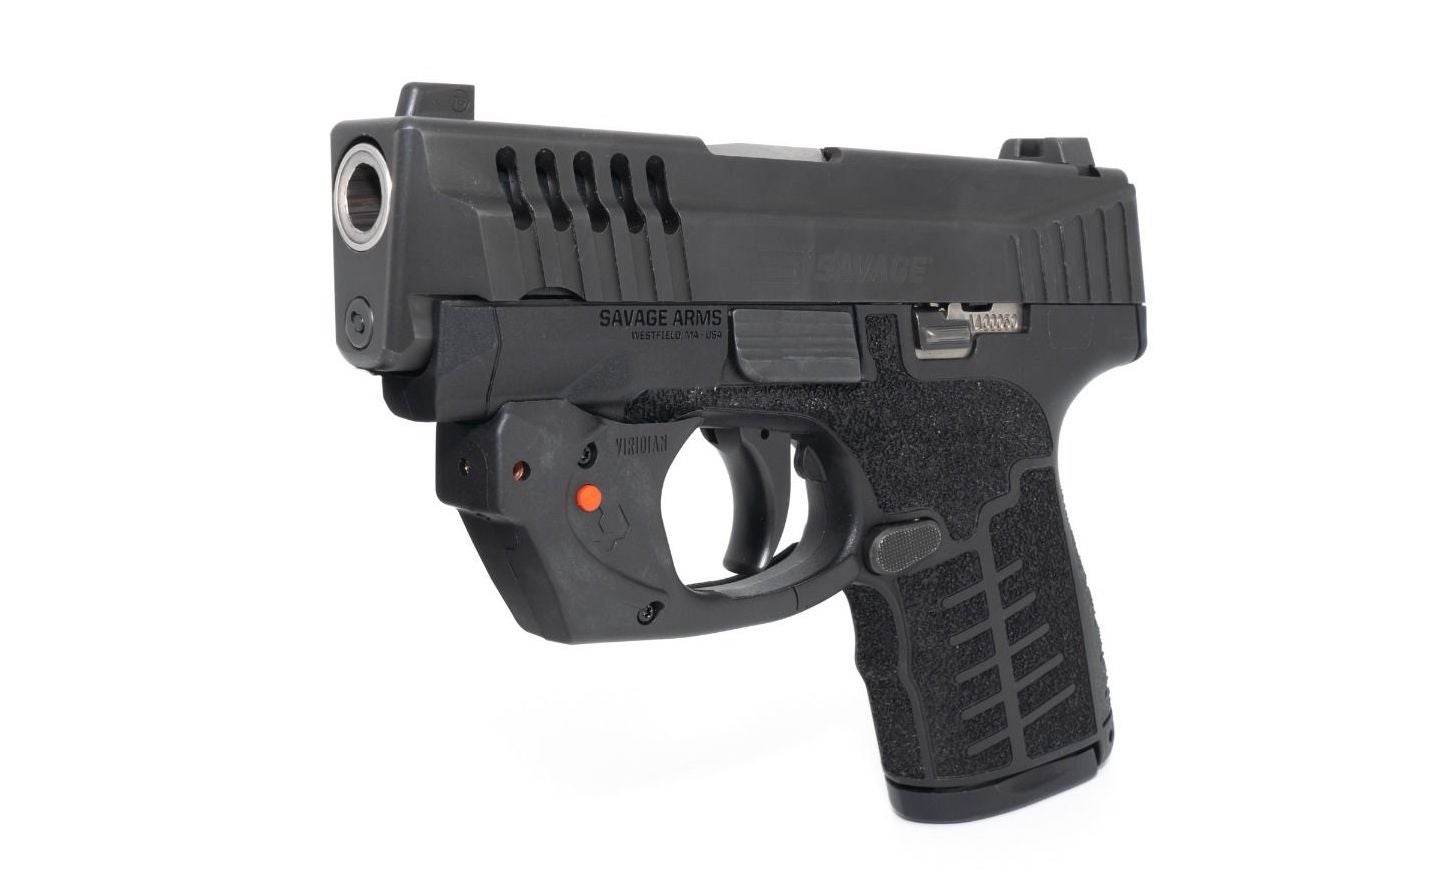 Viridian Announces Red E Series Laser Sight for Savage Arms Stance Pistols